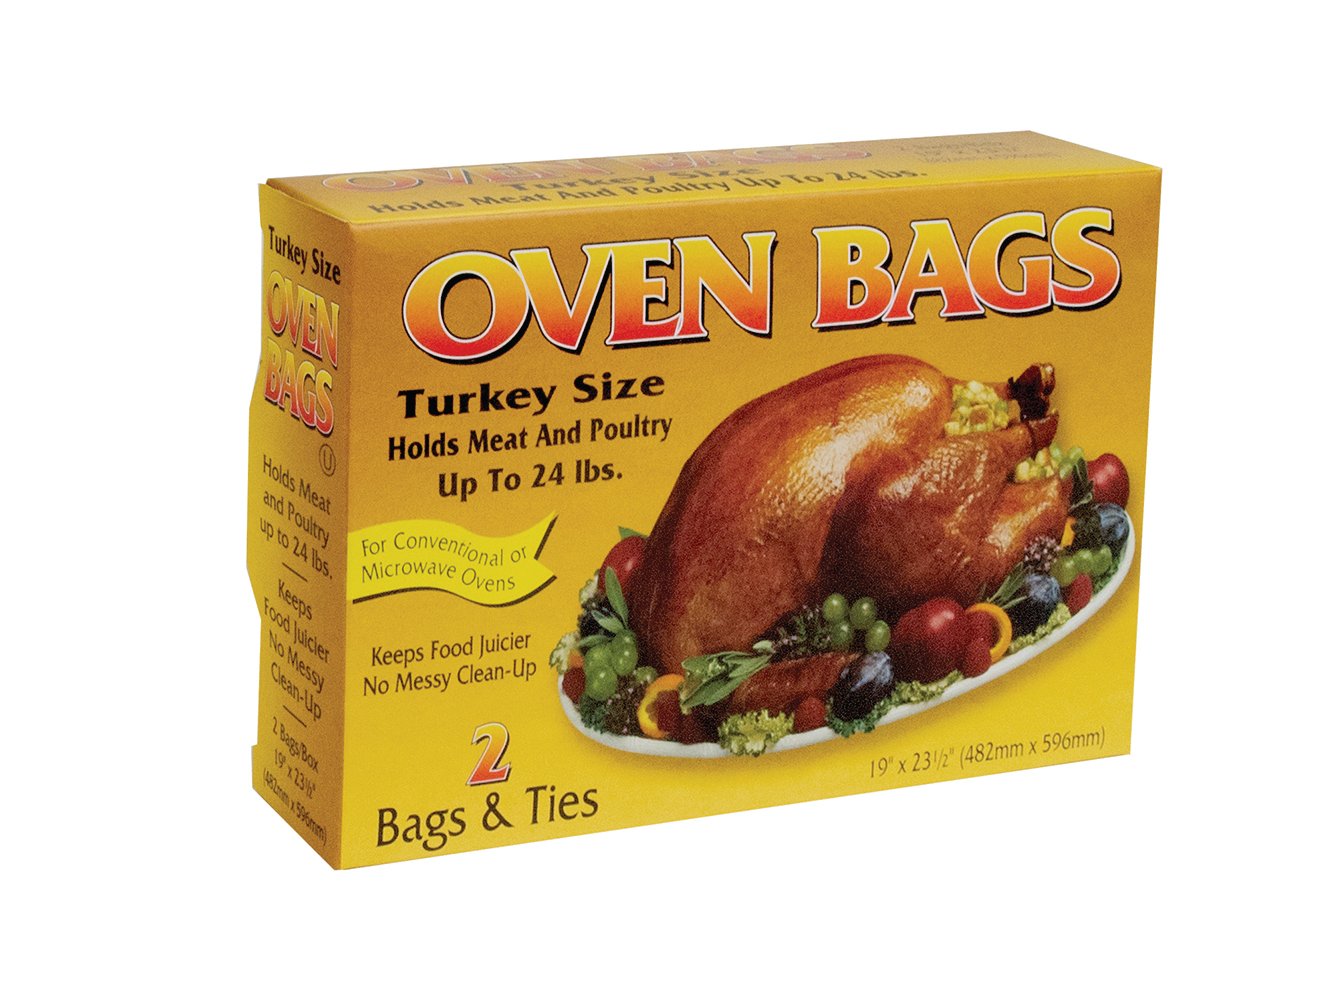 Turkey Size Oven Bags - 2 Bags and Ties - 56430093